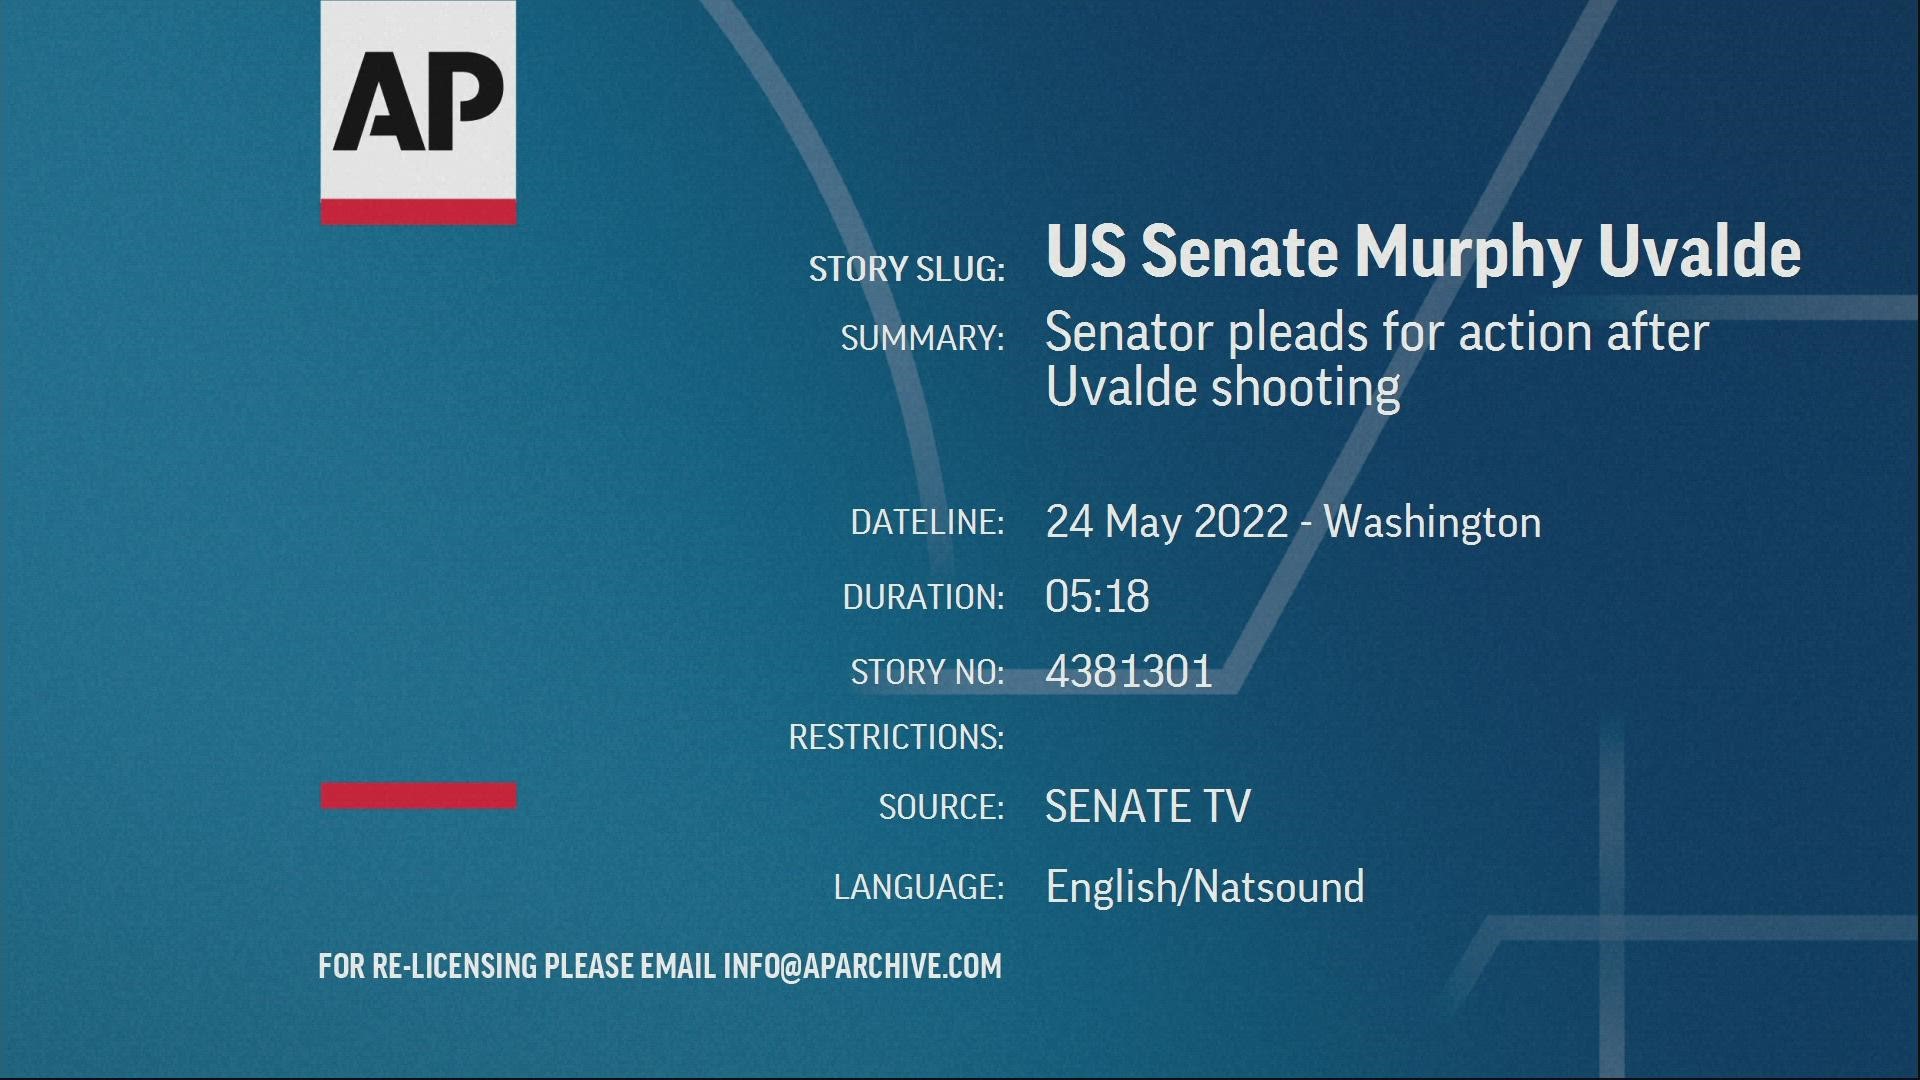 Senator Chris Murphy addressed the Senate floor after 19 children and two teachers were killed in a mass shooting at Robb elementary in Uvalde, Texas.